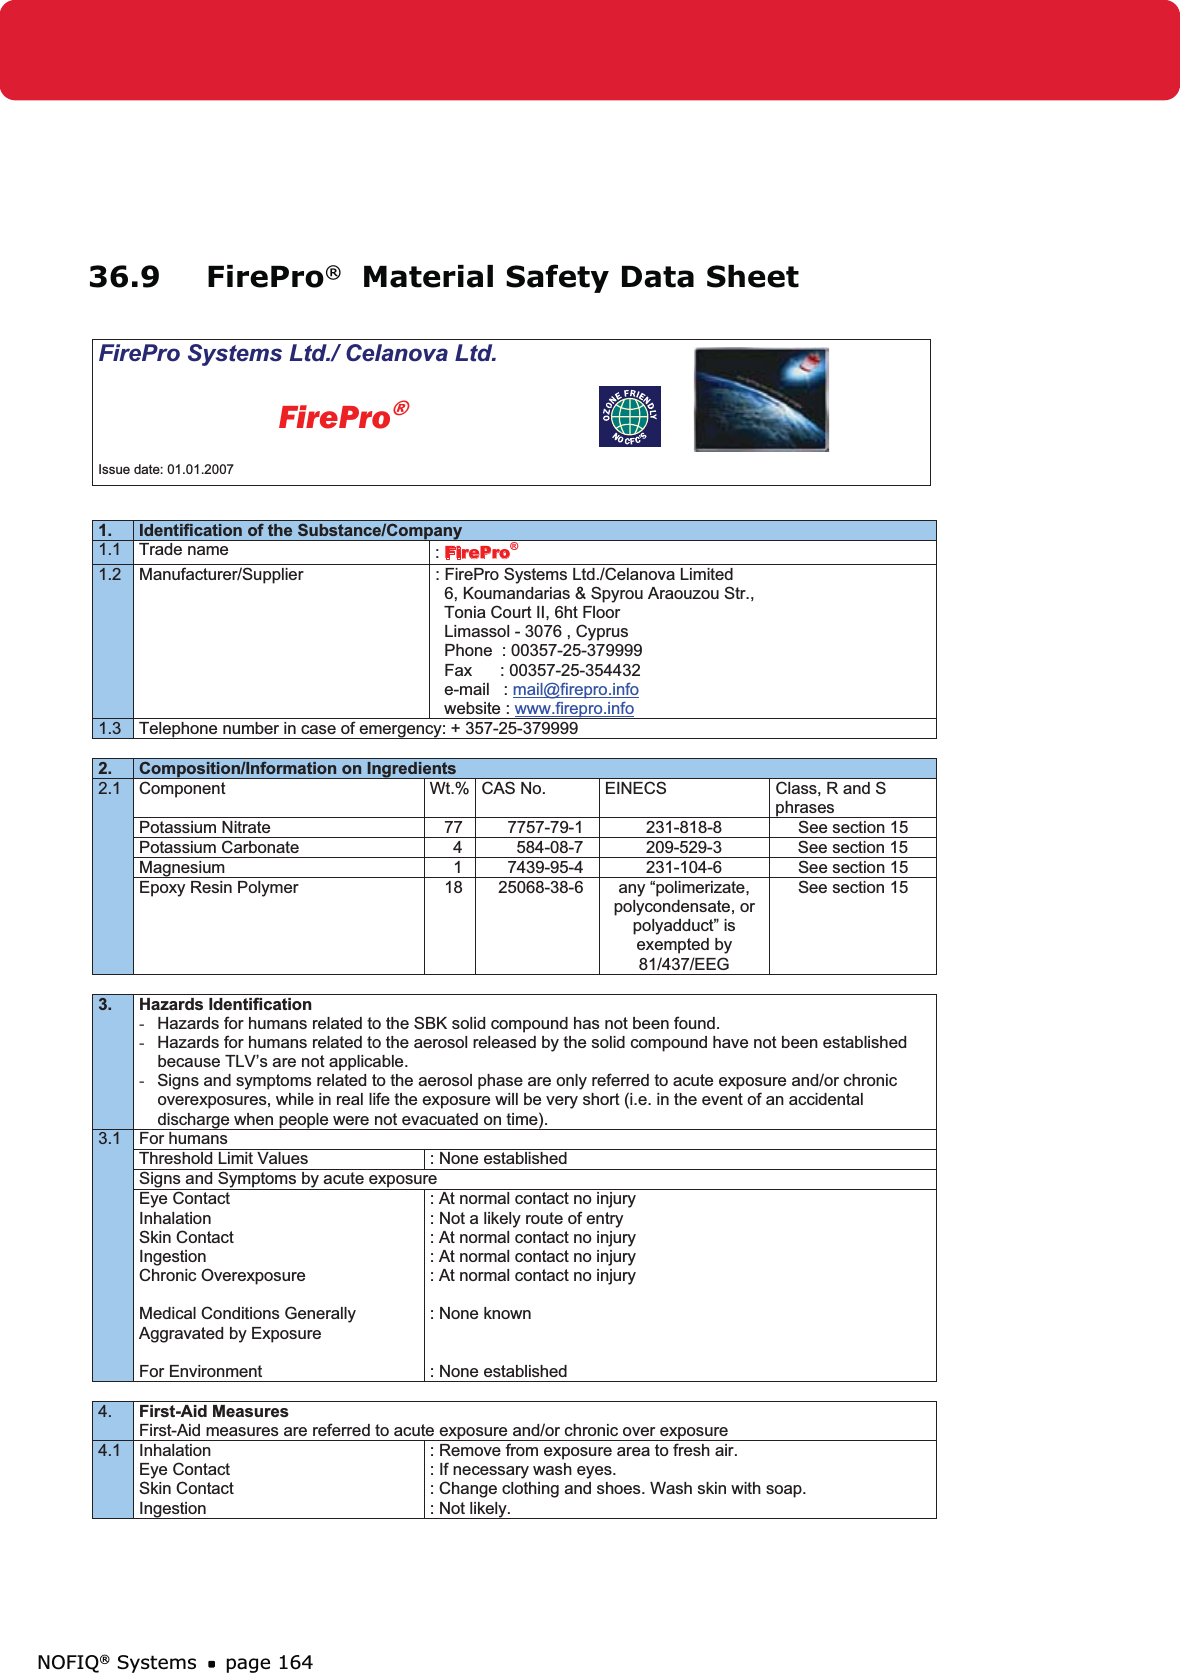 NOFIQ® Systems page 16436.9 FirePro®  Material Safety Data Sheet FirePro Systems Ltd./ Celanova Ltd.          FirePro®Issue date: 01.01.2007 1. Identification of the Substance/Company 1.1 Trade name  :FirePro®1.2  Manufacturer/Supplier  : FirePro Systems Ltd./Celanova Limited   6, Koumandarias &amp; Spyrou Araouzou Str.,   Tonia Court II, 6ht Floor   Limassol - 3076 , Cyprus   Phone  : 00357-25-379999   Fax      : 00357-25-354432   e-mail   : mail@firepro.info  website : www.firepro.info1.3  Telephone number in case of emergency: + 357-25-379999 2. Composition/Information on Ingredients 2.1 Component  Wt.% CAS No.  EINECS  Class, R and S phrases Potassium Nitrate  77  7757-79-1  231-818-8  See section 15 Potassium Carbonate  4  584-08-7  209-529-3  See section 15 Magnesium  1  7439-95-4  231-104-6  See section 15 Epoxy Resin Polymer  18  25068-38-6  any “polimerizate, polycondensate, or polyadduct” is exempted by 81/437/EEG See section 15 3. Hazards Identification -  Hazards for humans related to the SBK solid compound has not been found. -  Hazards for humans related to the aerosol released by the solid compound have not been established      because TLV’s are not applicable. -  Signs and symptoms related to the aerosol phase are only referred to acute exposure and/or chronic      overexposures, while in real life the exposure will be very short (i.e. in the event of an accidental      discharge when people were not evacuated on time).3.1 For humans Threshold Limit Values  : None established Signs and Symptoms by acute exposure Eye Contact InhalationSkin Contact Ingestion Chronic Overexposure Medical Conditions Generally Aggravated by Exposure For Environment : At normal contact no injury : Not a likely route of entry : At normal contact no injury : At normal contact no injury : At normal contact no injury : None known : None established 4. First-Aid Measures First-Aid measures are referred to acute exposure and/or chronic over exposure 4.1 Inhalation Eye Contact Skin Contact Ingestion : Remove from exposure area to fresh air.  : If necessary wash eyes. : Change clothing and shoes. Wash skin with soap. : Not likely. 